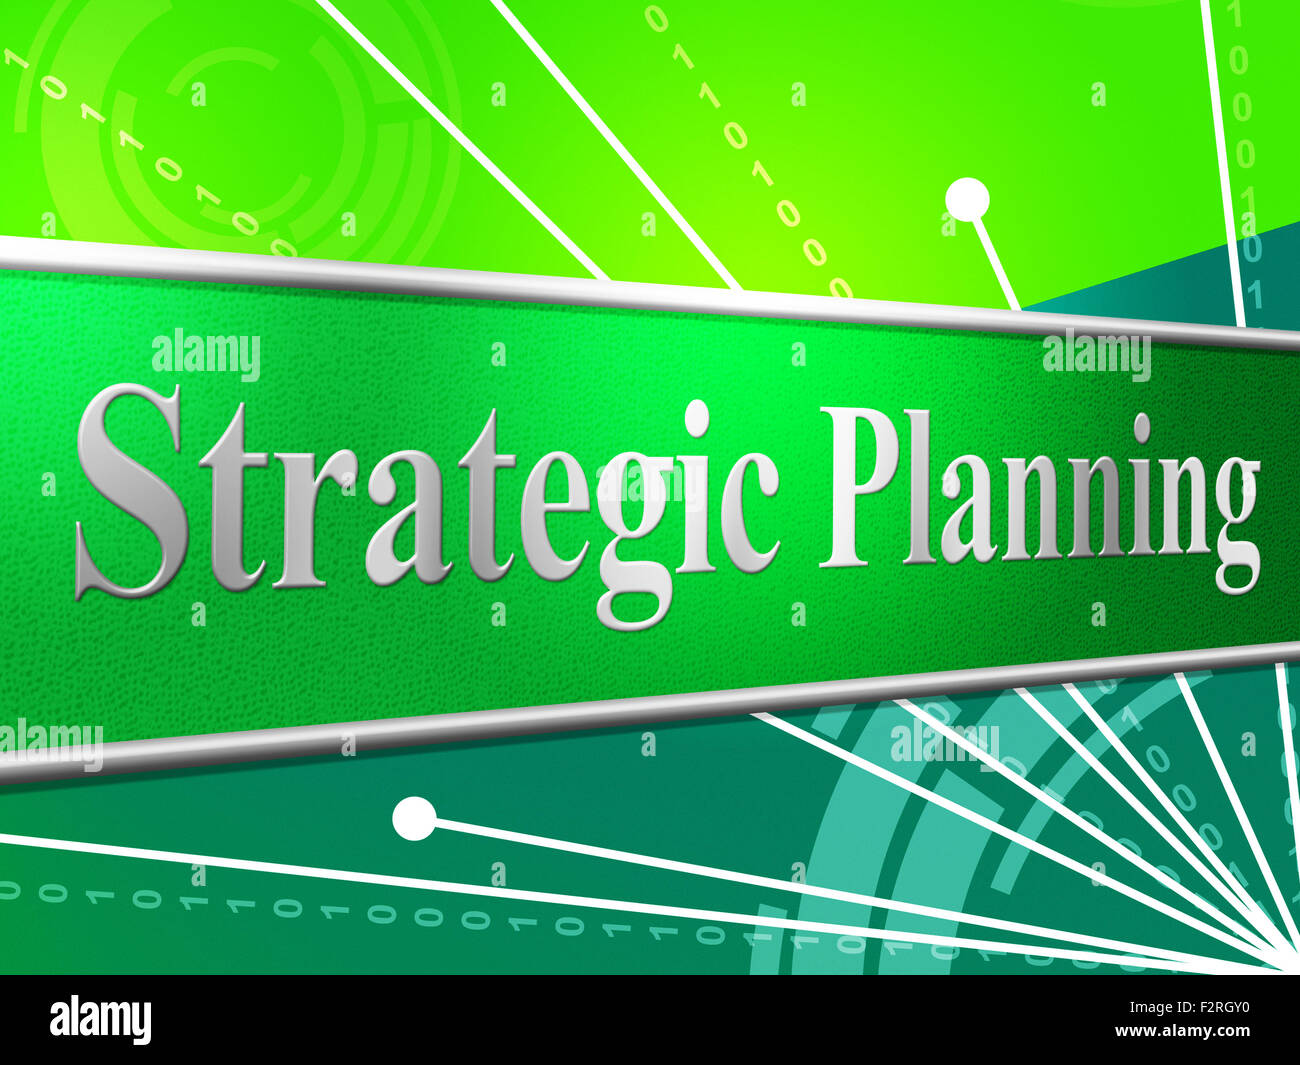 Strategic Planning Indicating Business Strategy And Idea Stock Photo